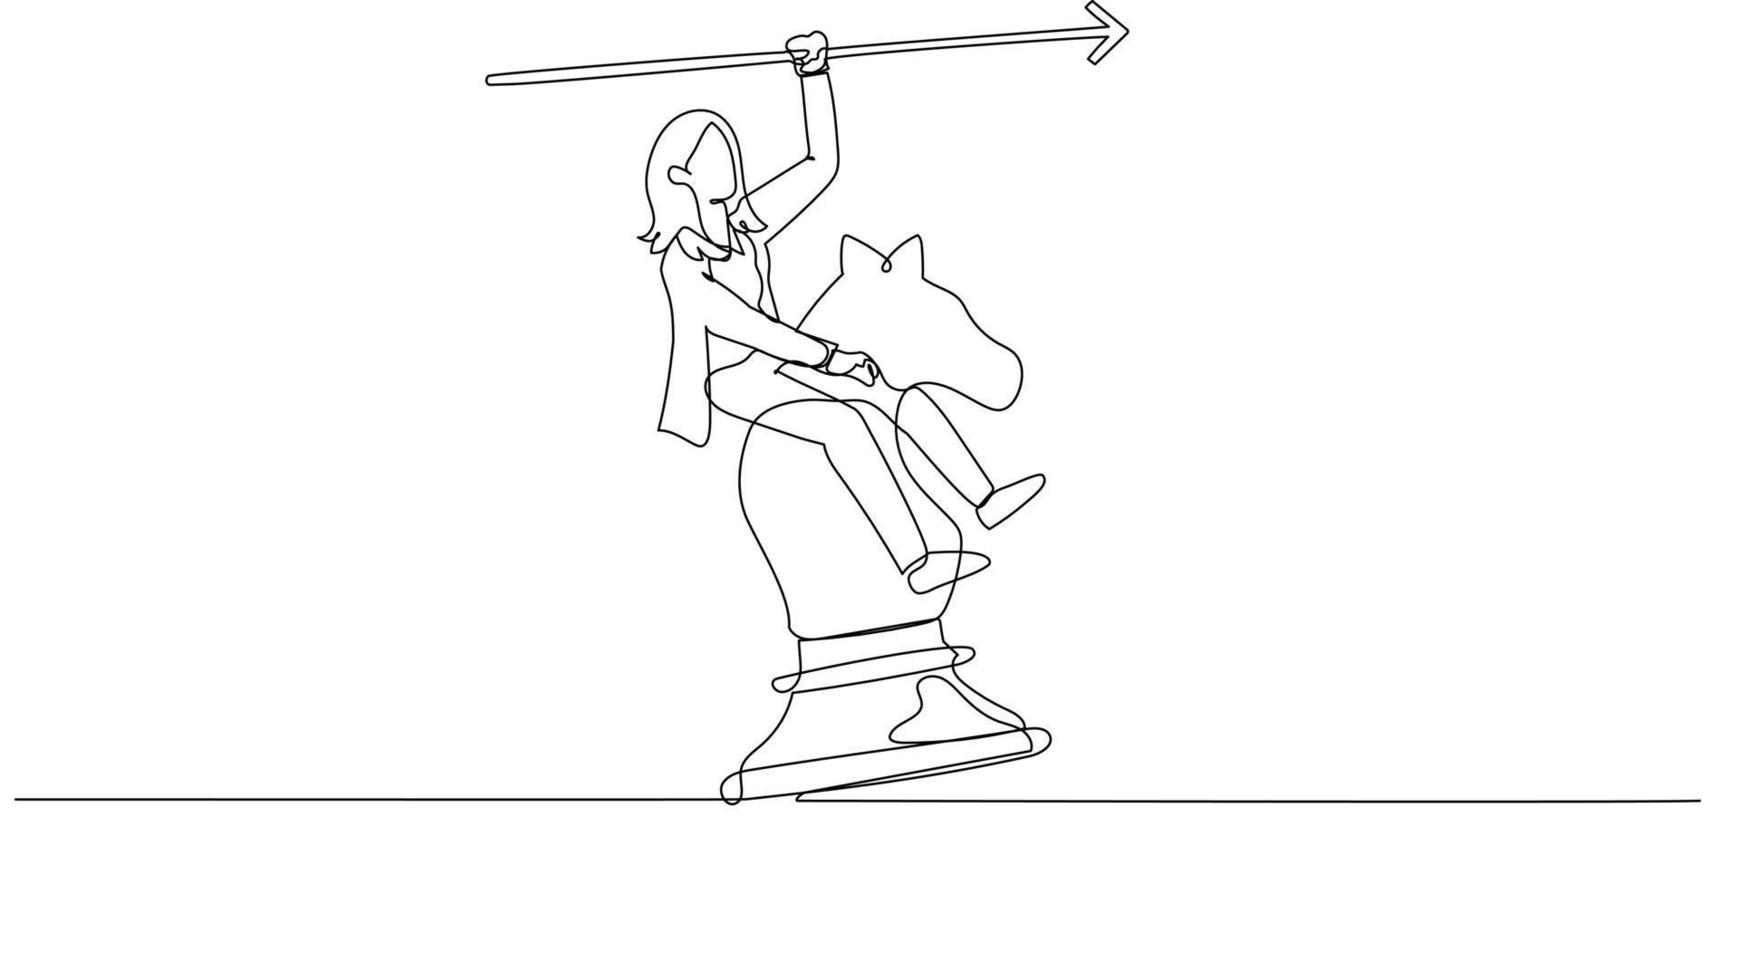 Cartoon of businesswoman riding chess horse metaphor for business fighting and strategy. One continuous line art style vector